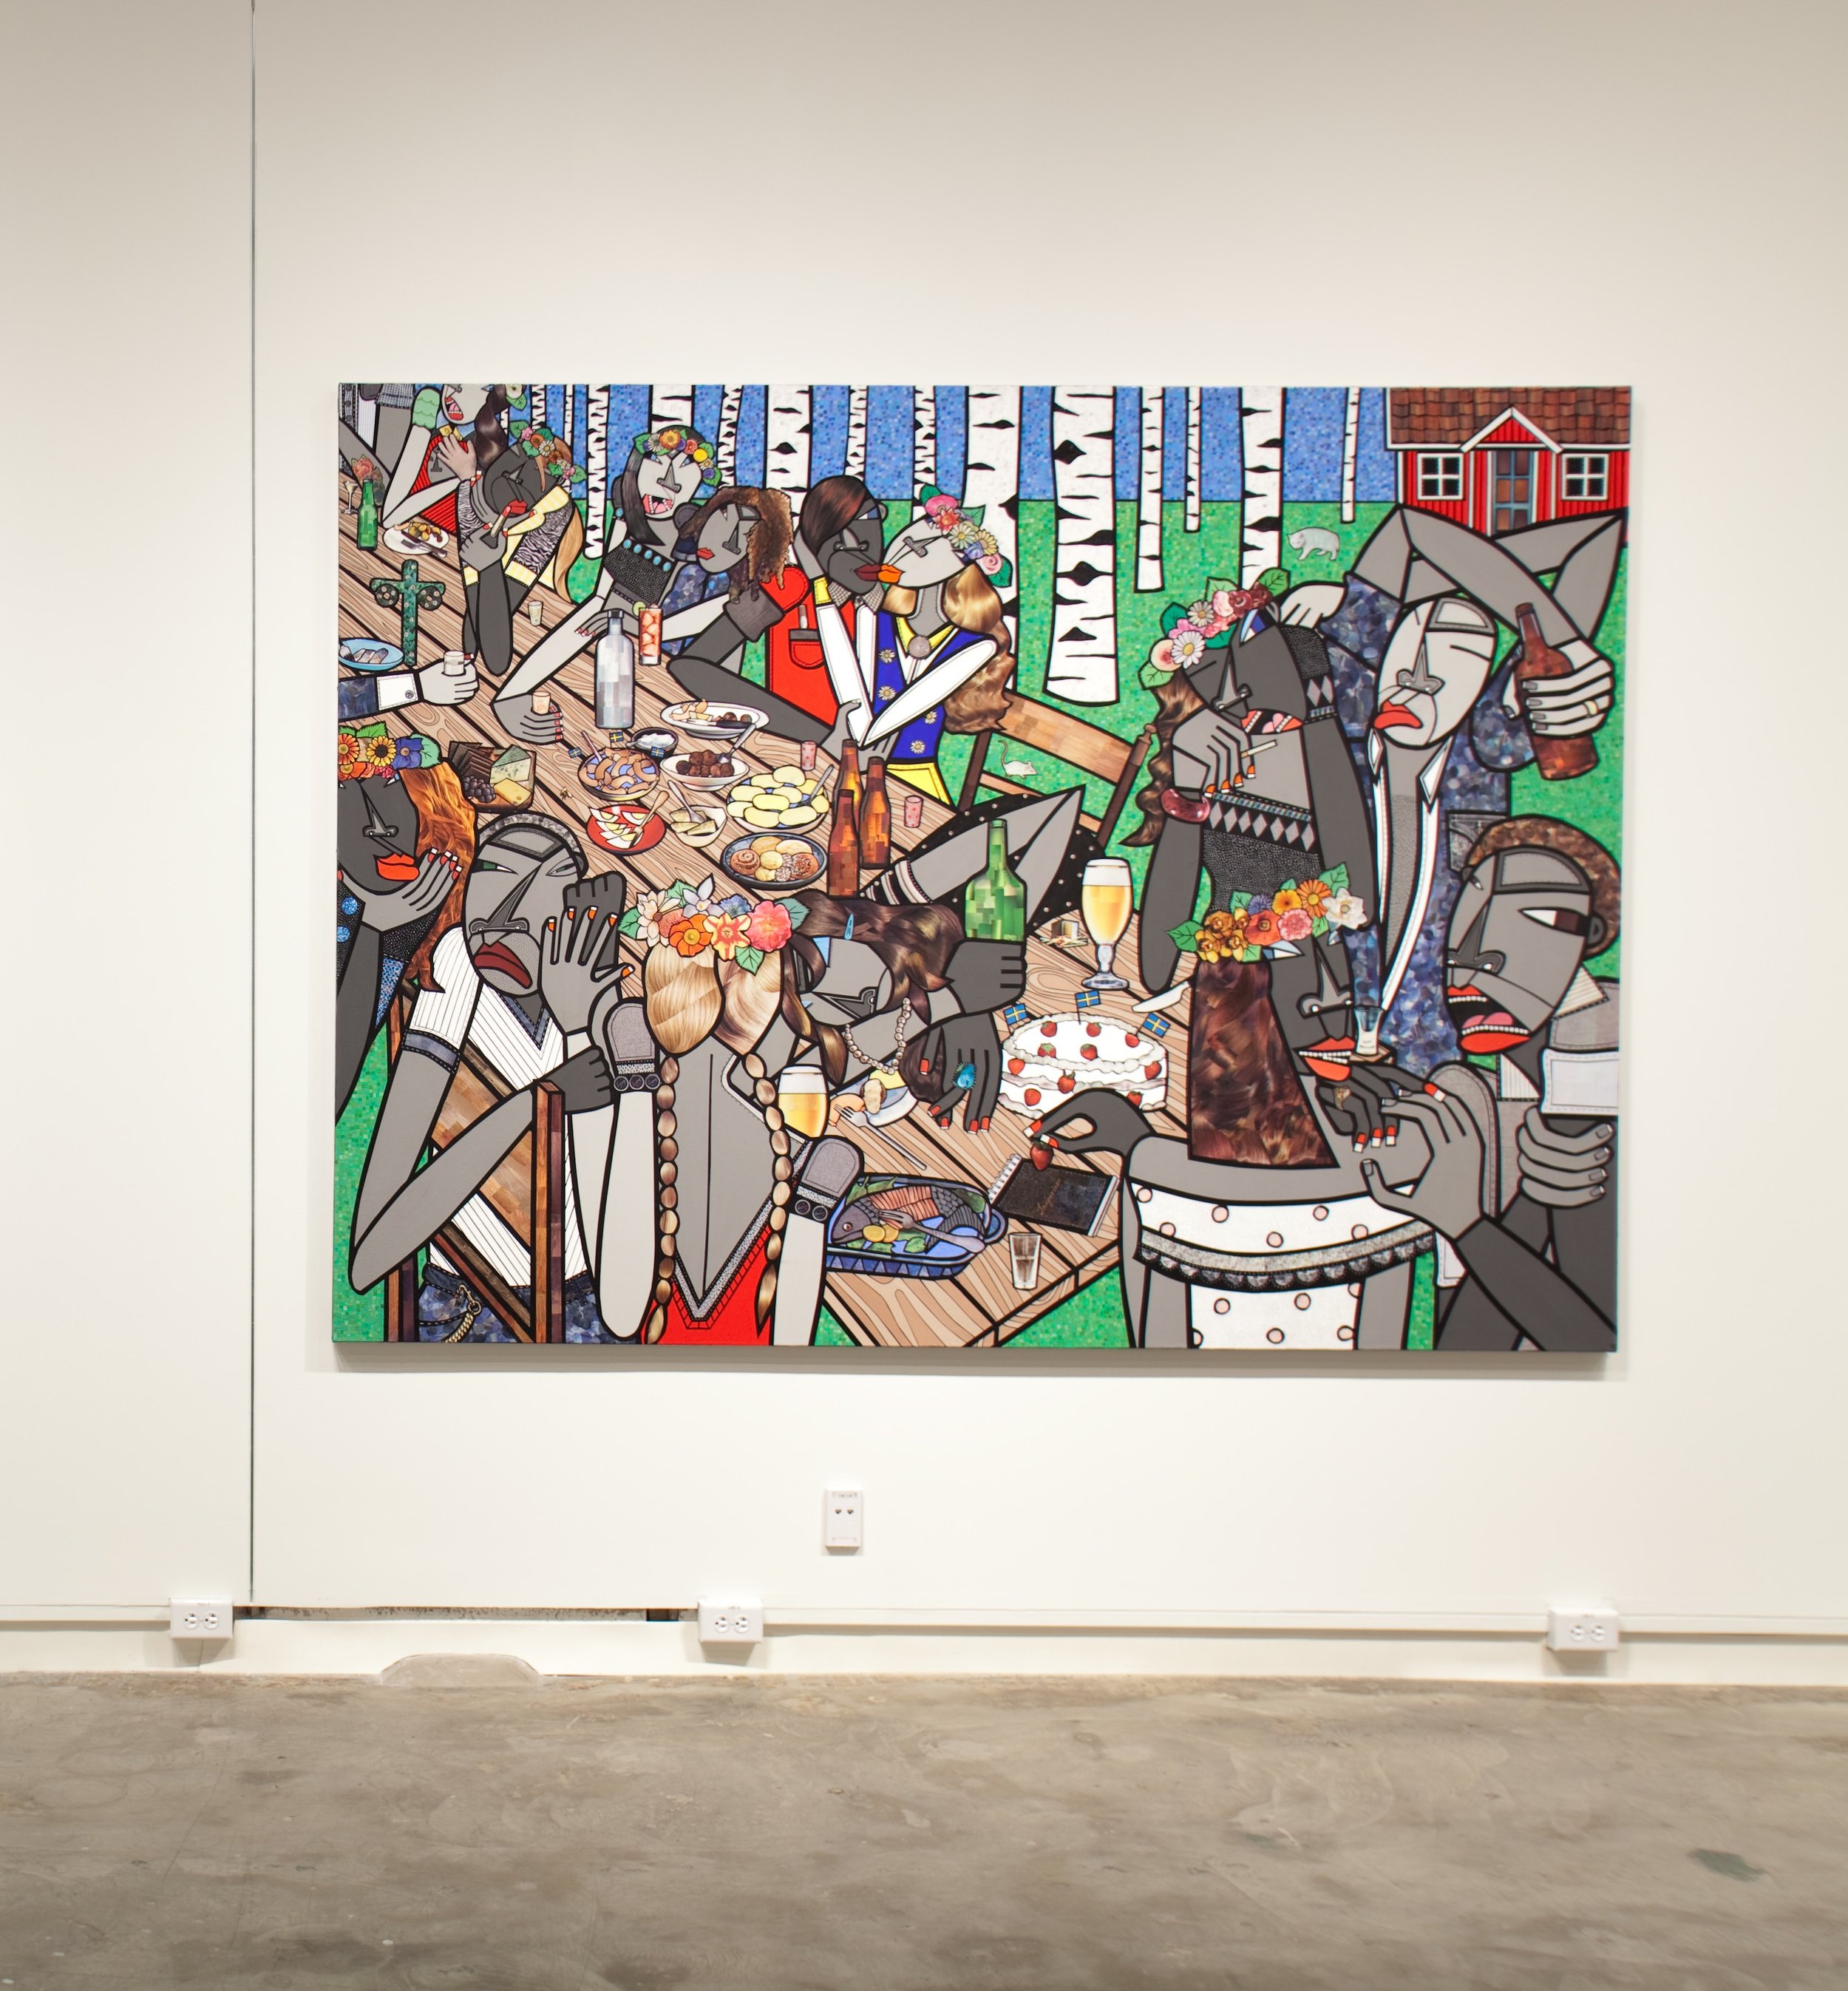 A Swedish Midsummer Feast, 2009, acrylic and hand cut paper collage on canvas, 72 x 96 inches